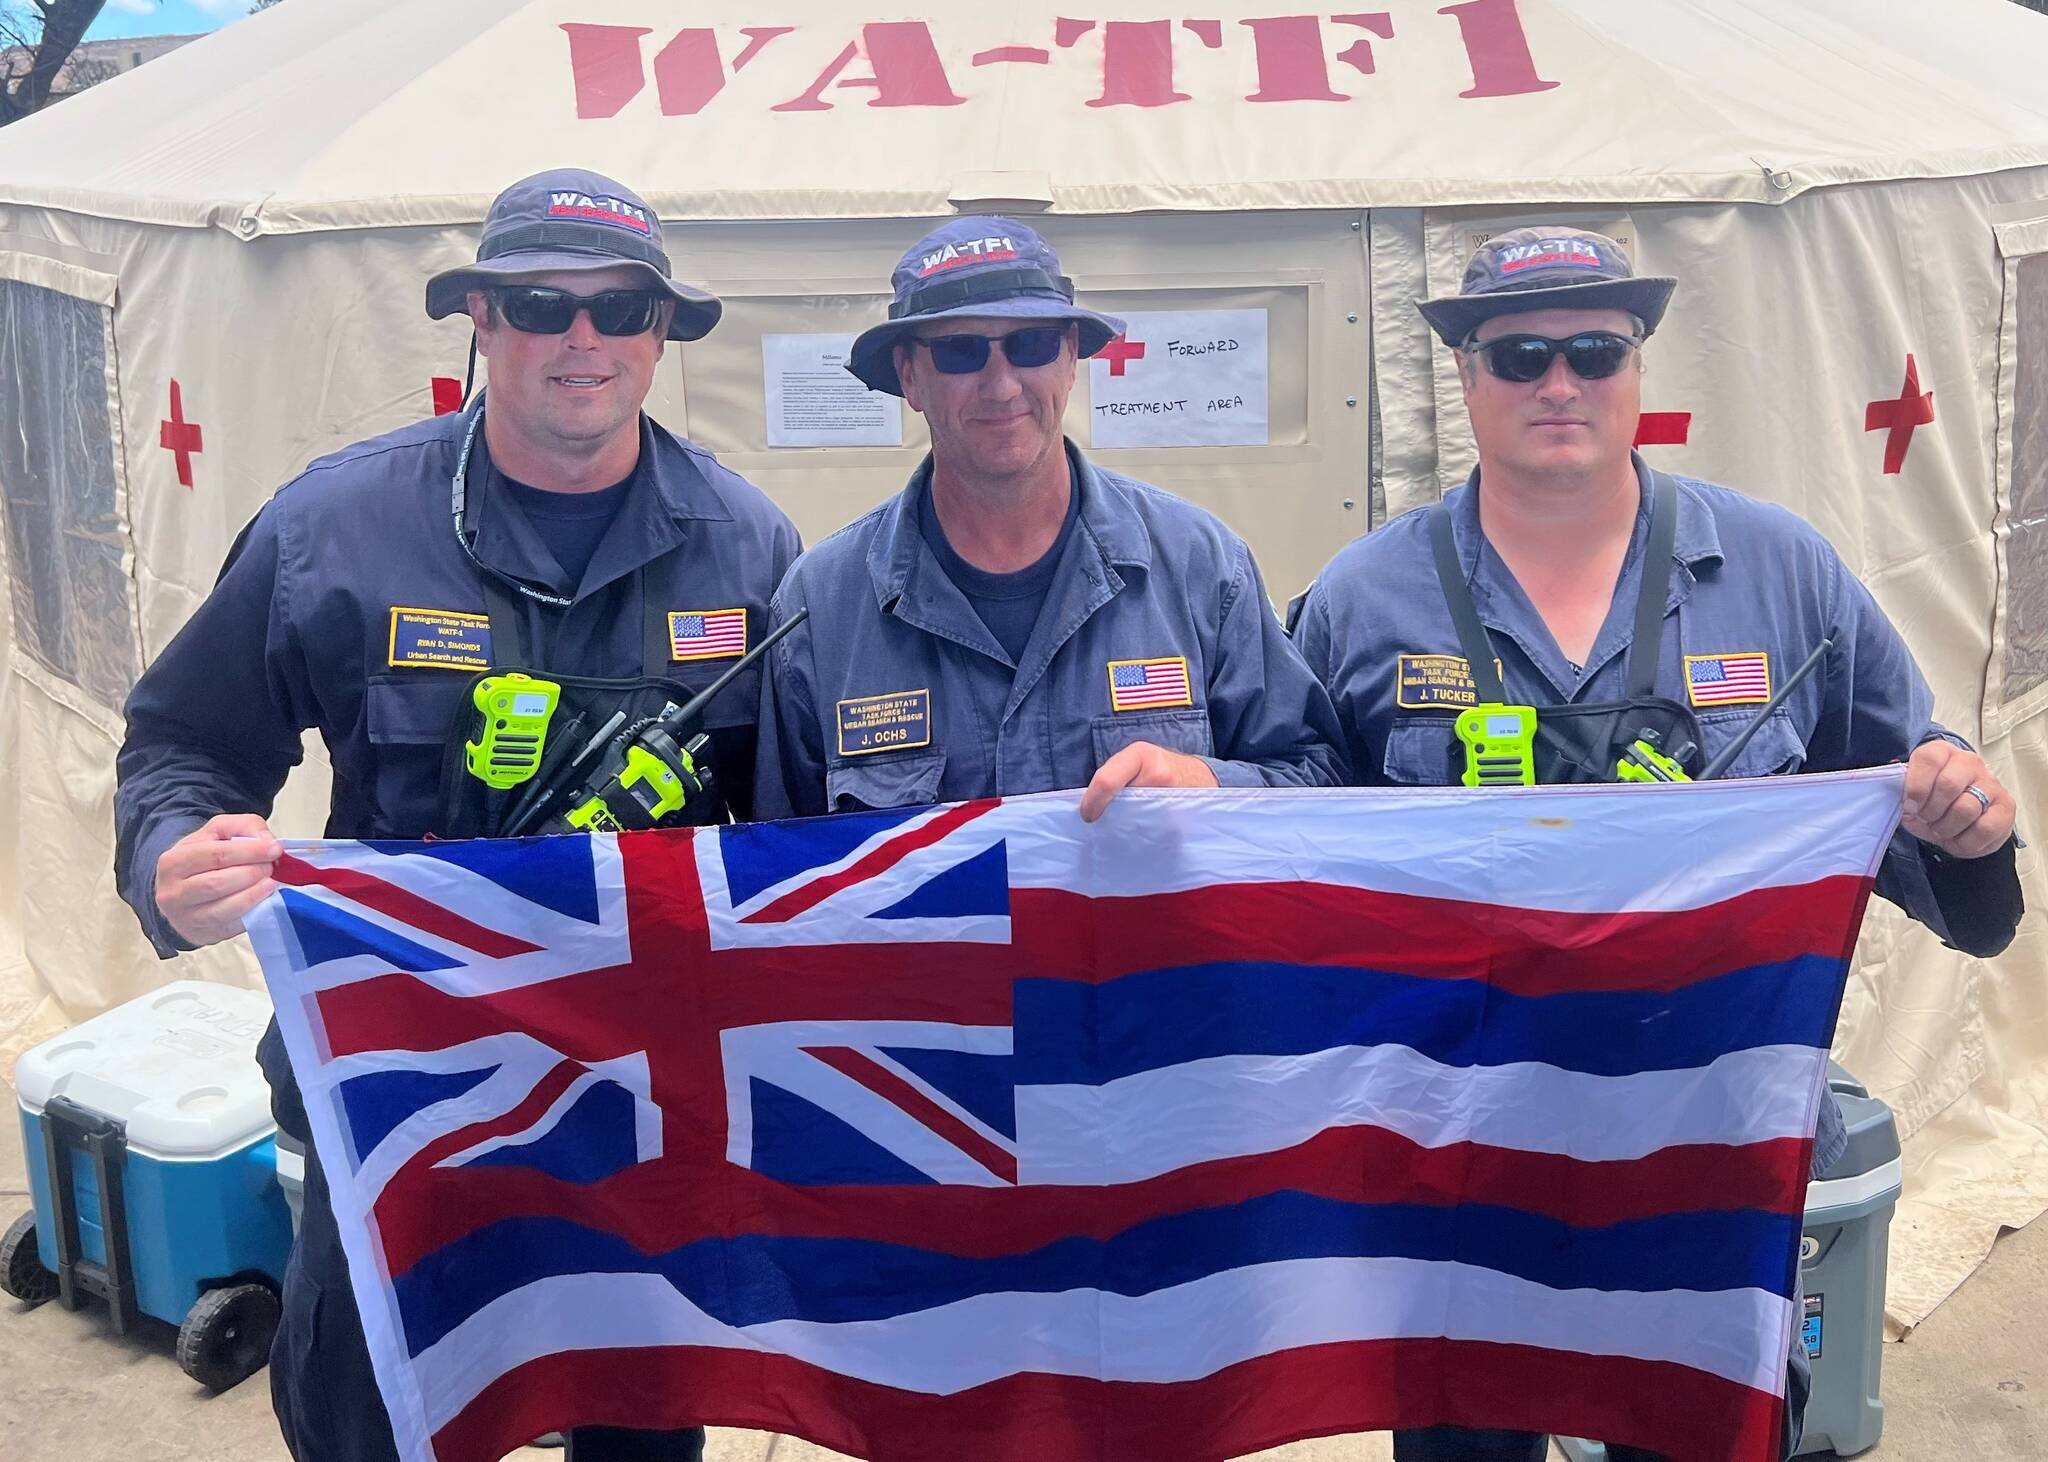 Battalion Chief Ryan Simonds, Battalion Chief Jim Ochs, and firefighter and engineer Jeremy Tucker (left to right). (Courtesy of the Renton Regional Fire Authority.)